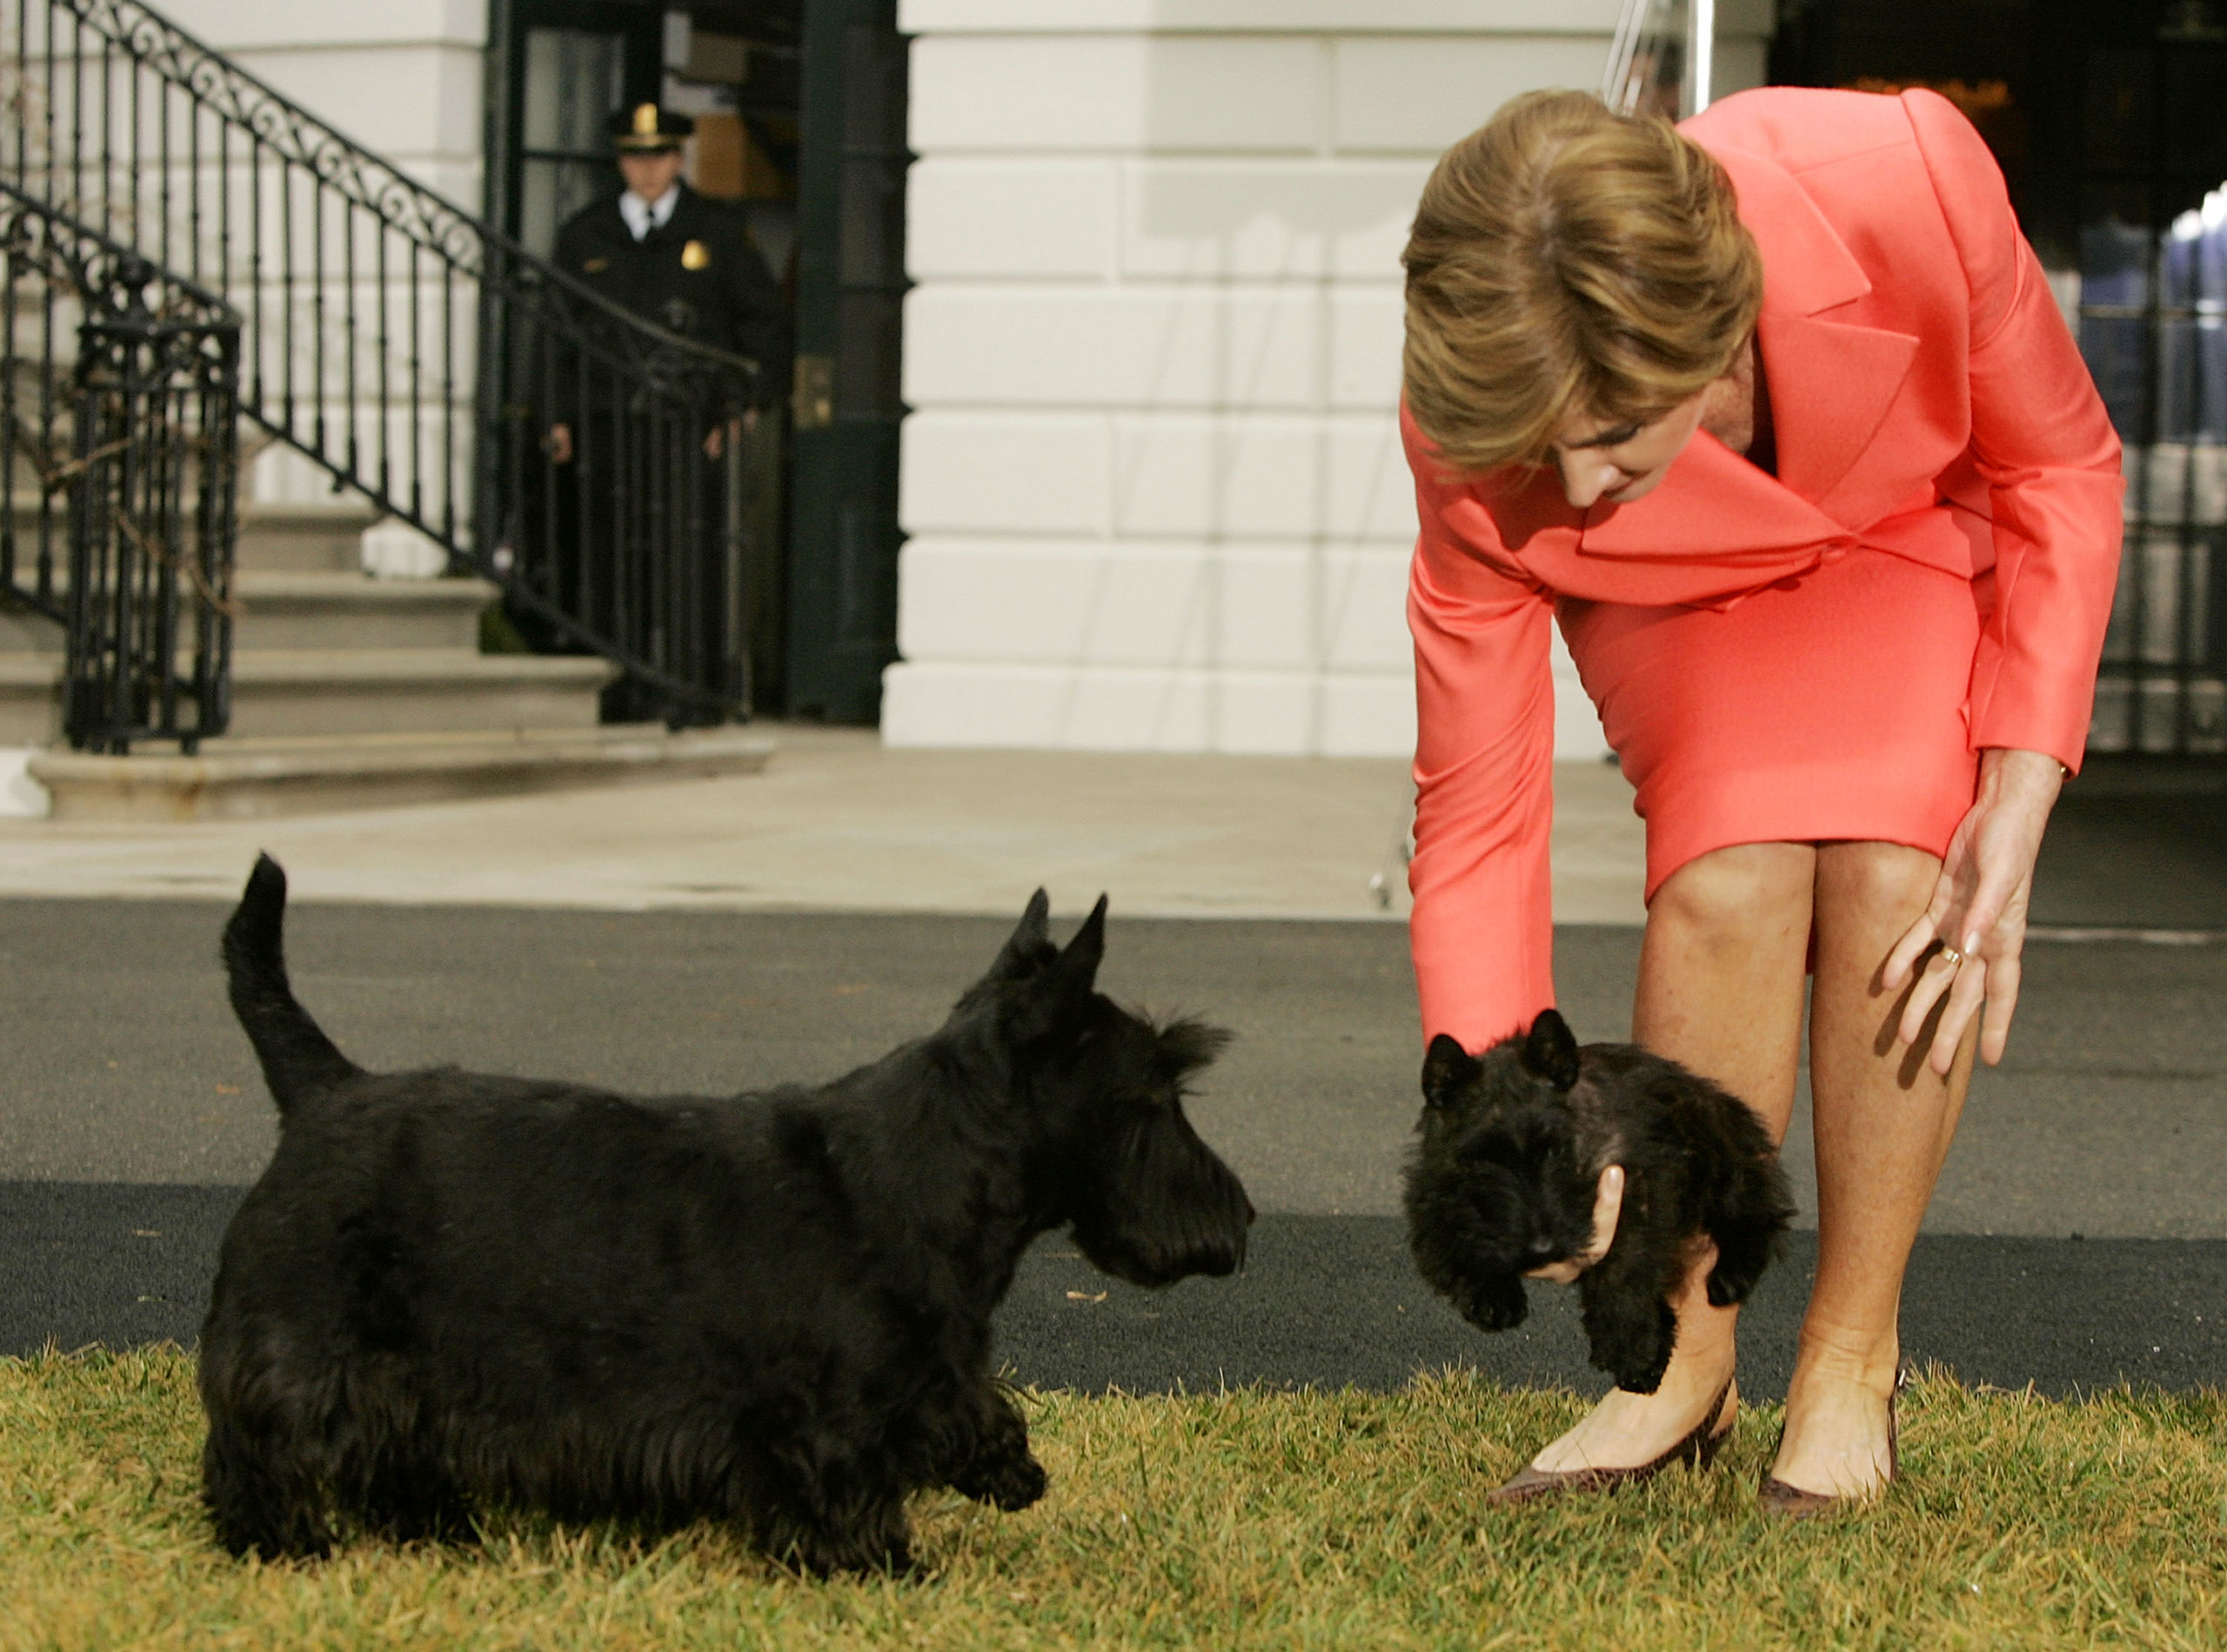 Presidential dog Barney prepares to acquaint himself with Miss Beazley, the Scottish Terrier pup given to First Lady, Laura Bush, as a birthday present by George W. Bush, during an event at the White House January 6, 2005. The dog was named for the character Uncle Beazley, a dinosaur in Oliver Butterworth's children's book,  The Enormous Egg.